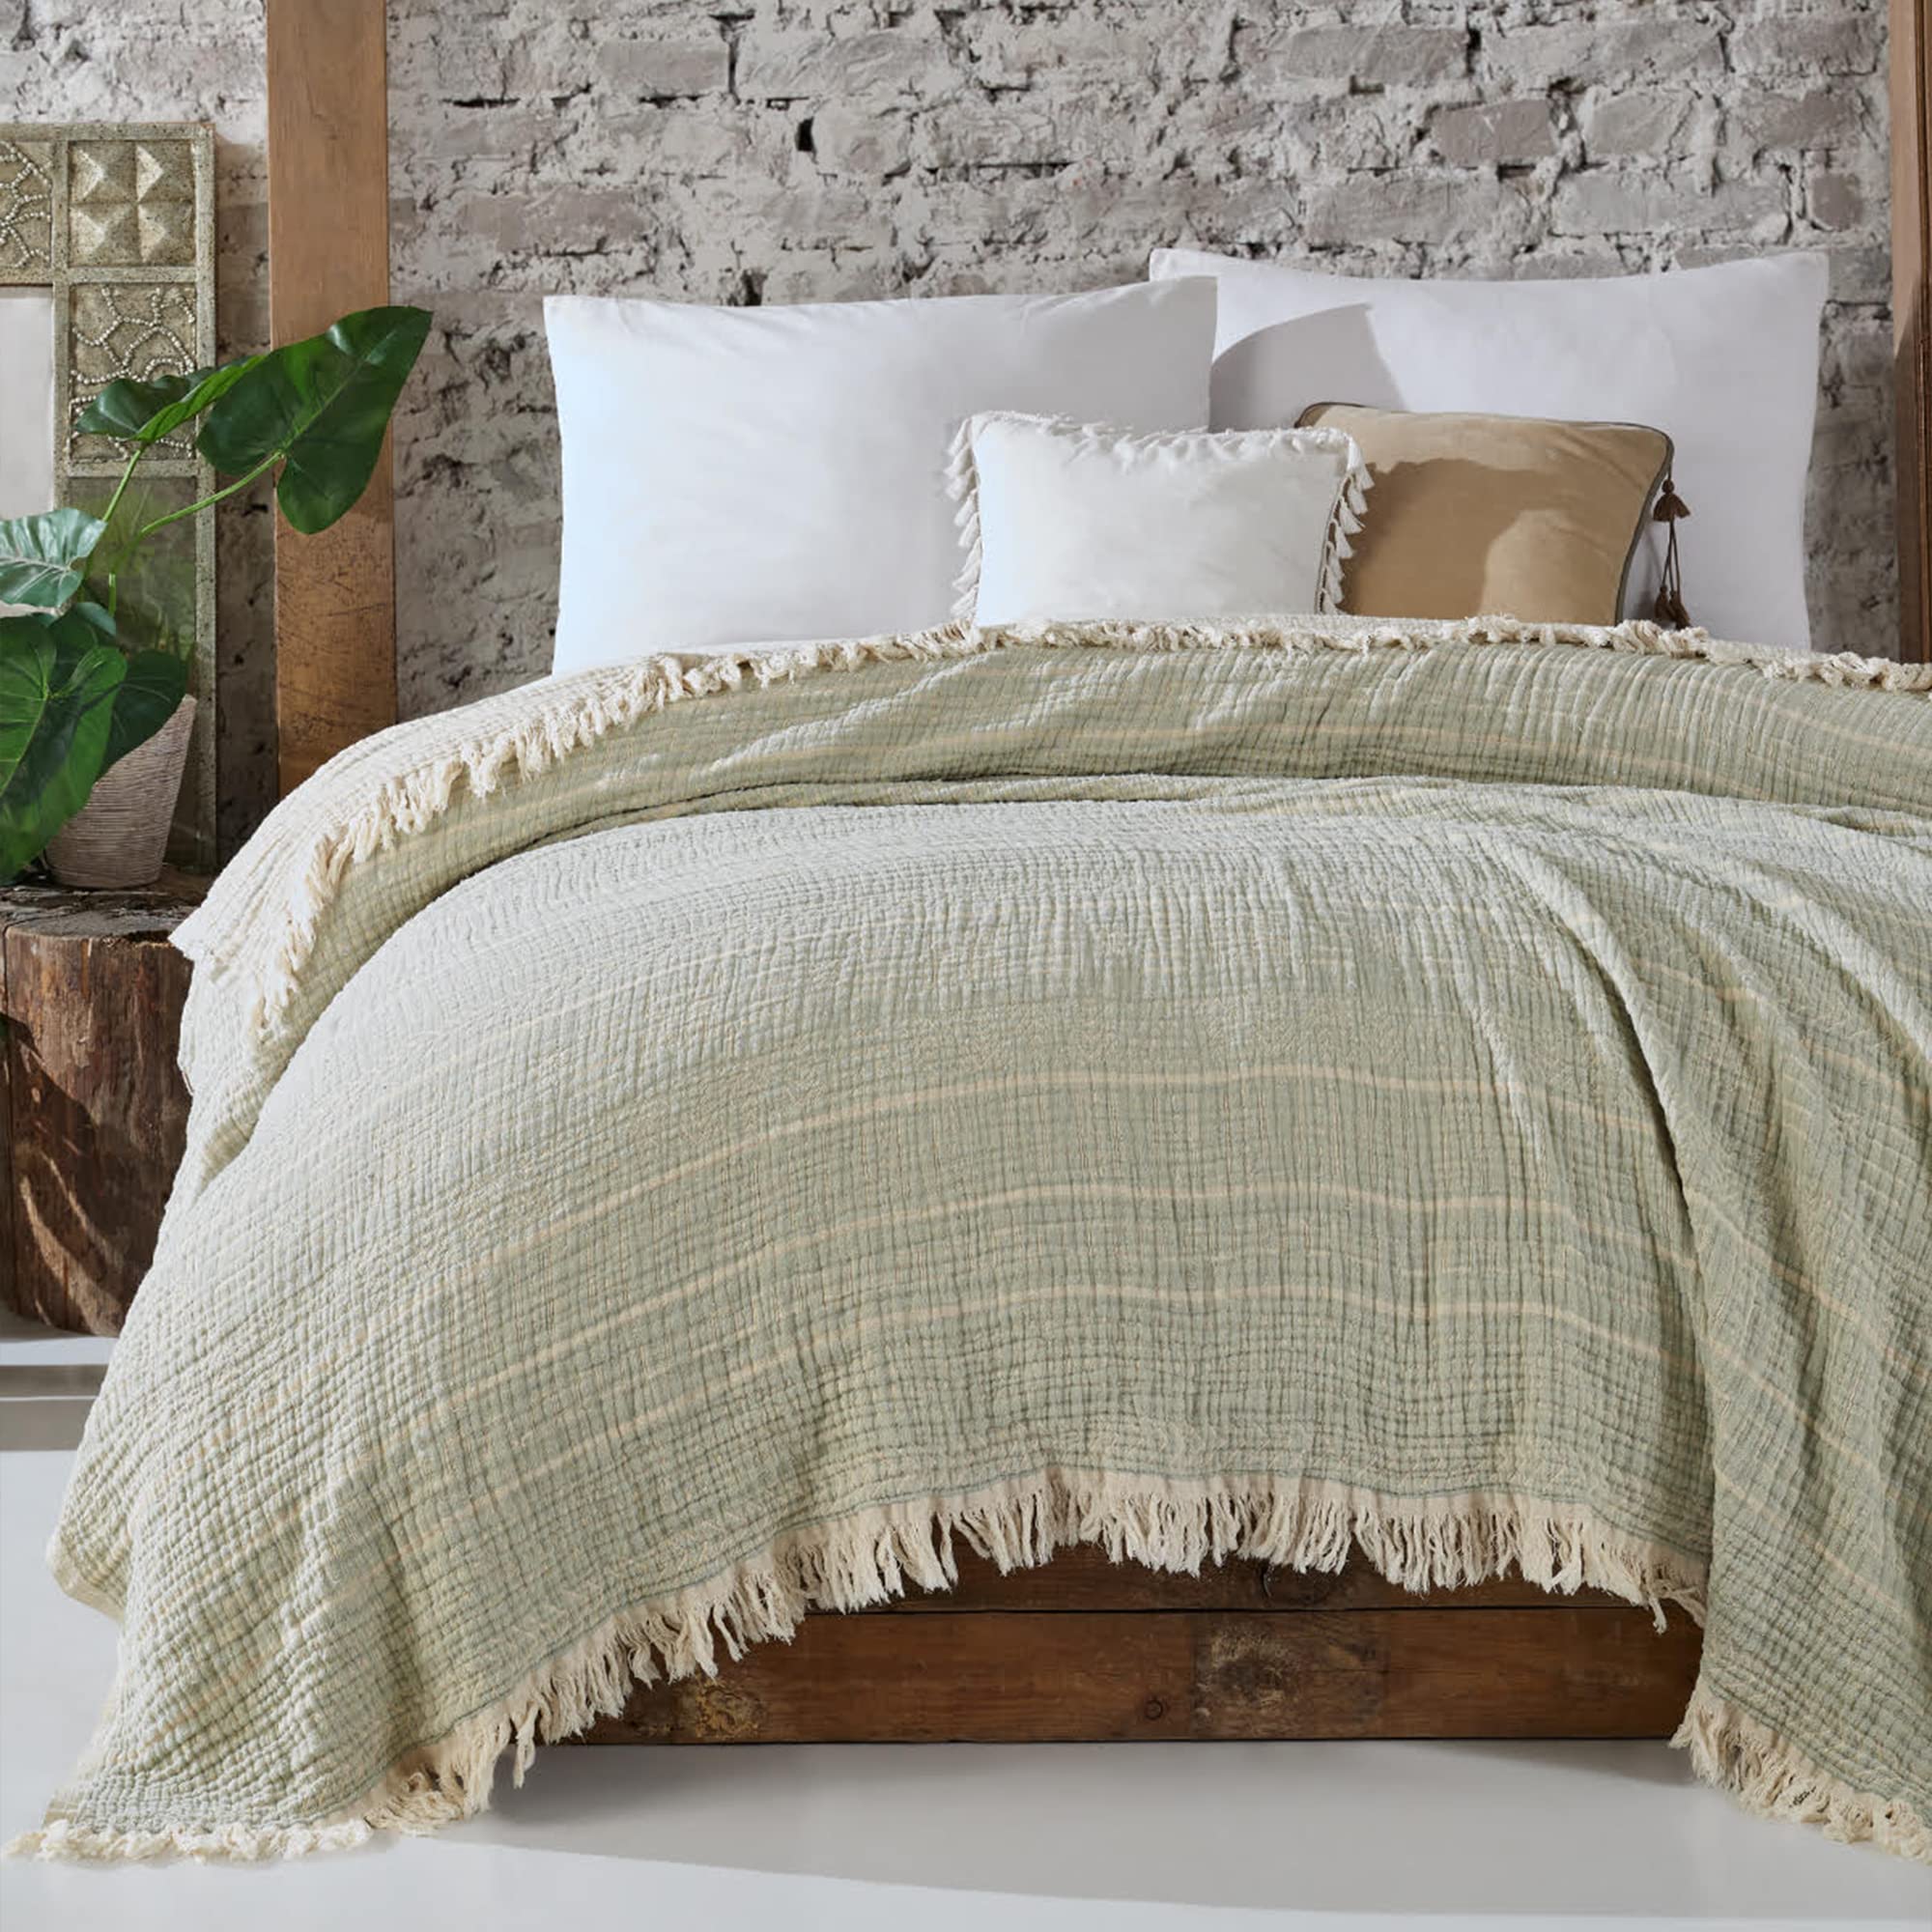 Milam London Boho 3 Layered Muslin Throw For Large Sofas Or Beds / Breathable Soft And Reversible Bedspread / Pre-washed 100% Organic Cotton / 220 x 240cm / Green